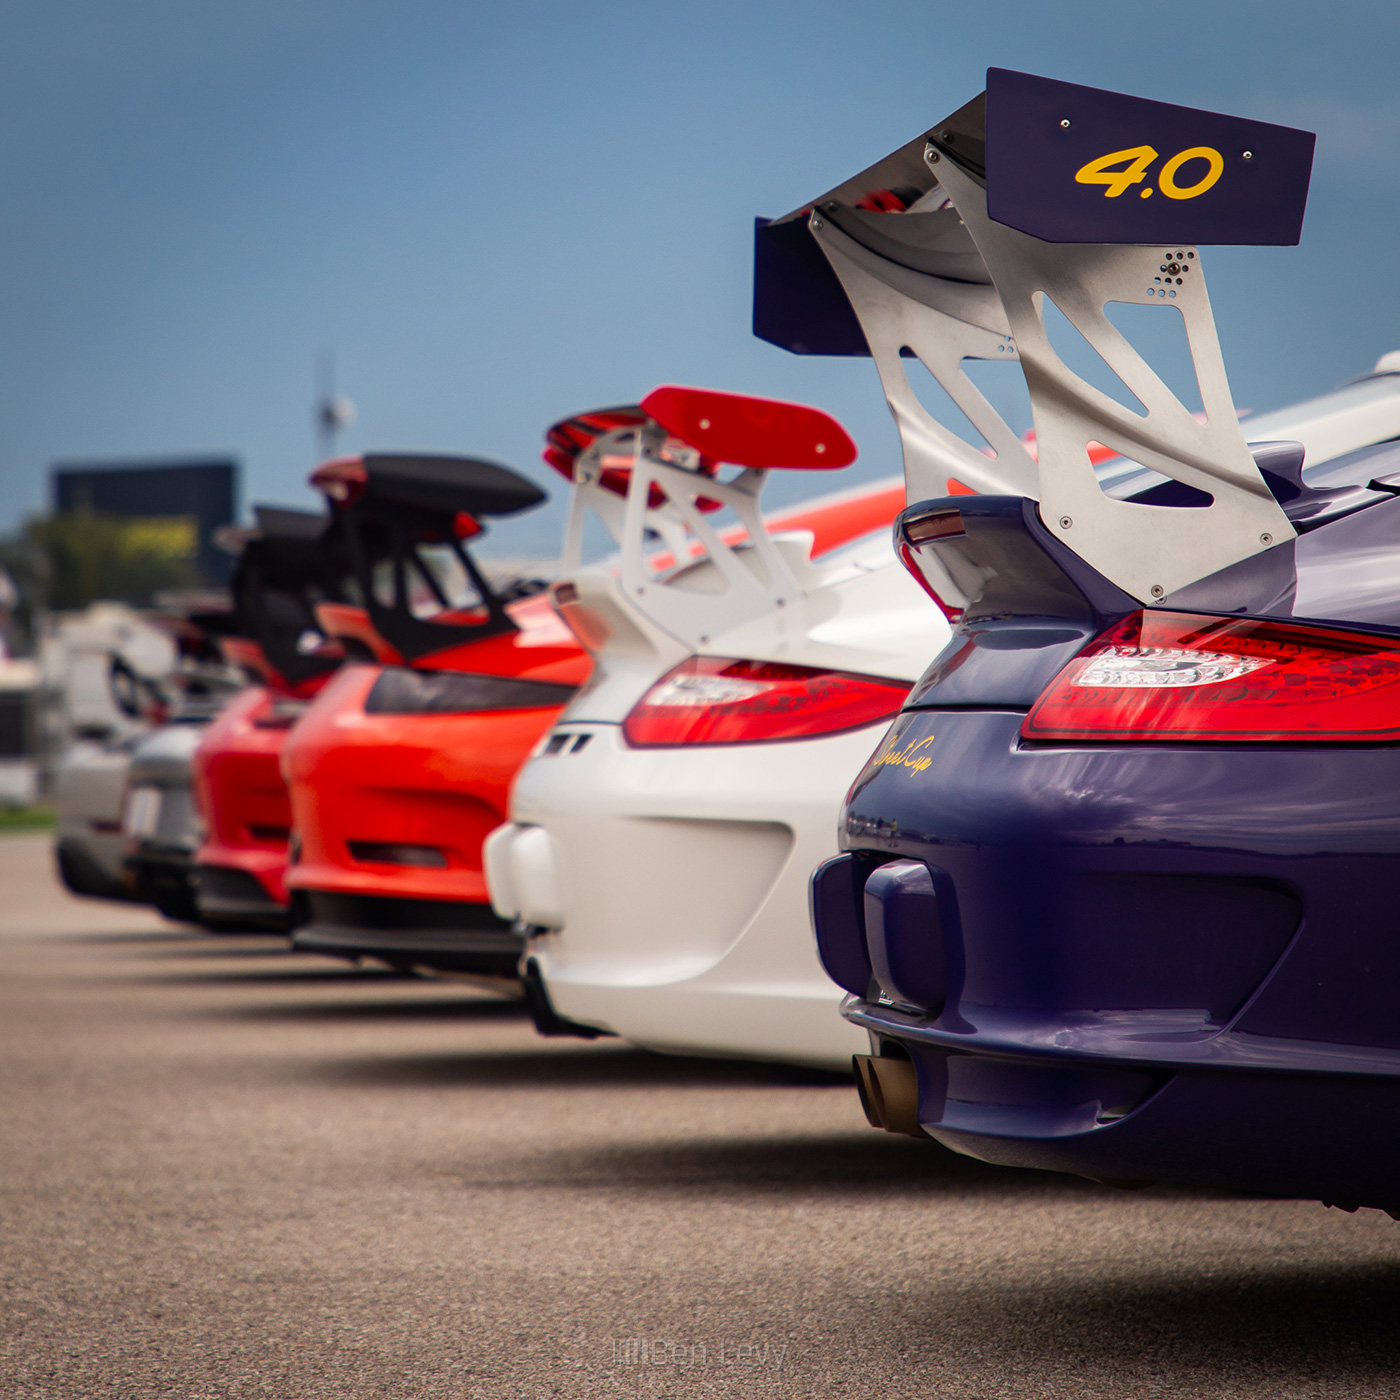 Wings on Porsche GT Cars at Sports Car Together Fest at IMS